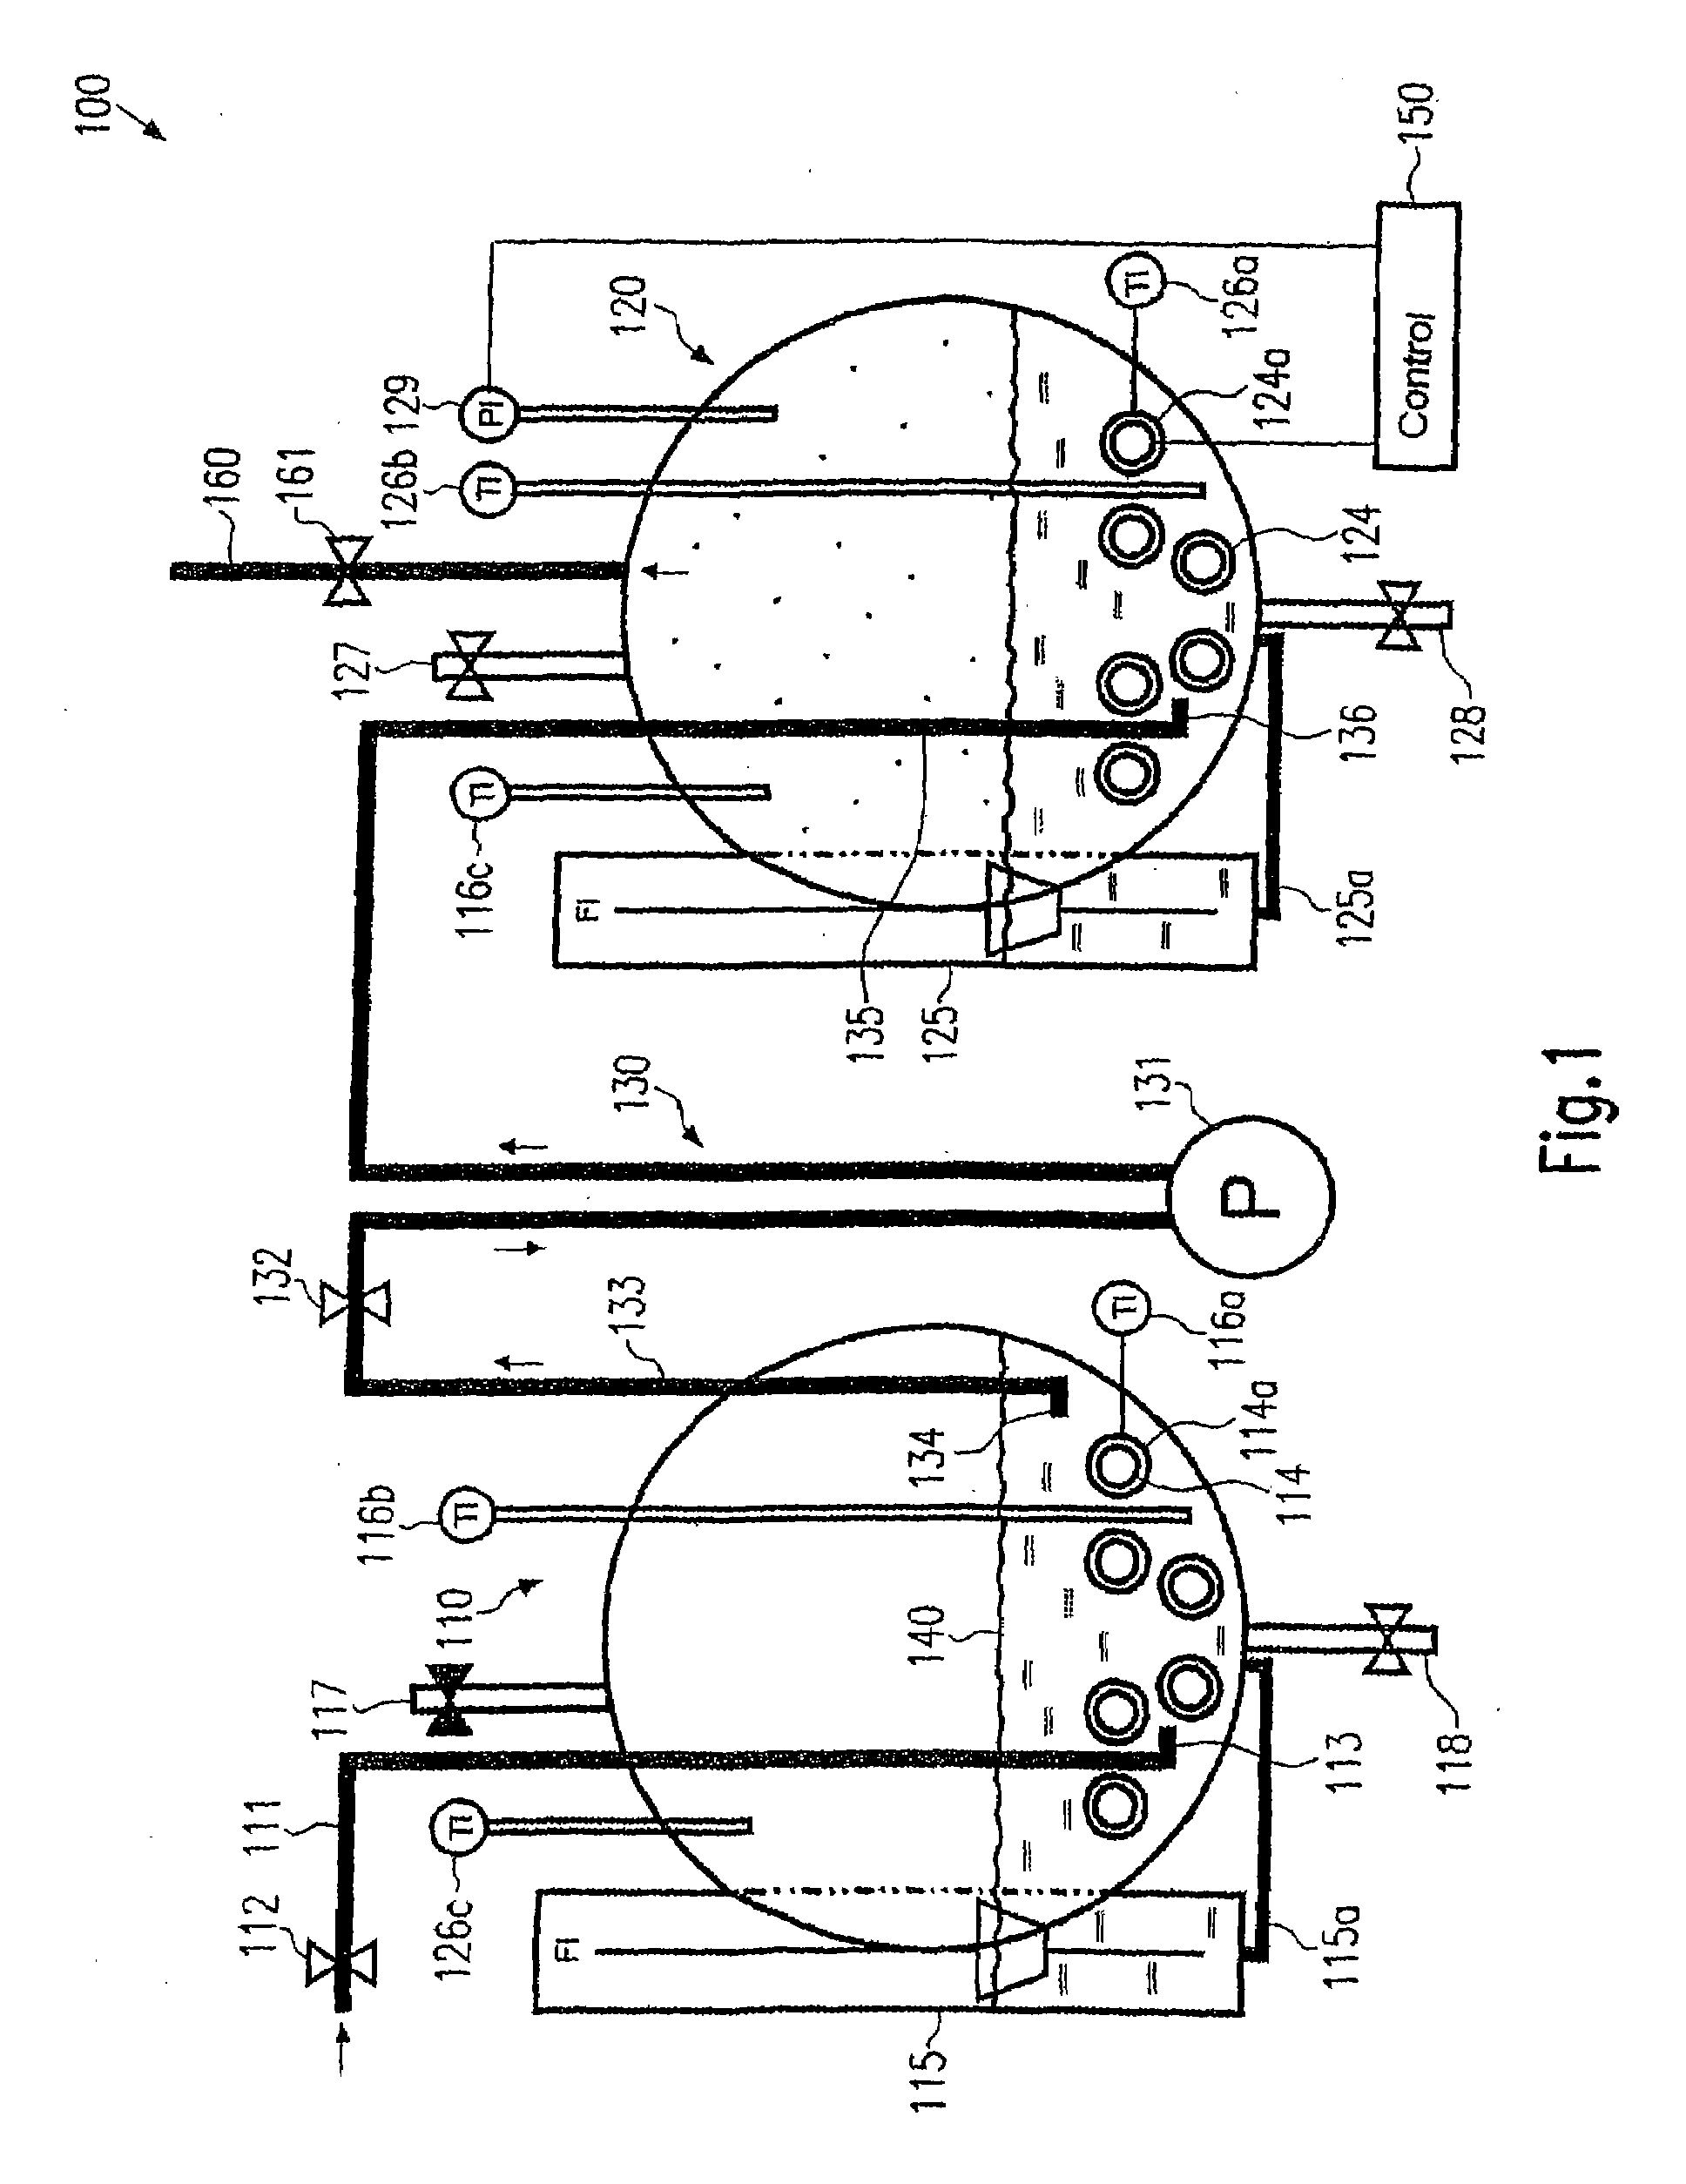 Vapor-Operated Soldering System and Vapor Generation System for a Soldering System